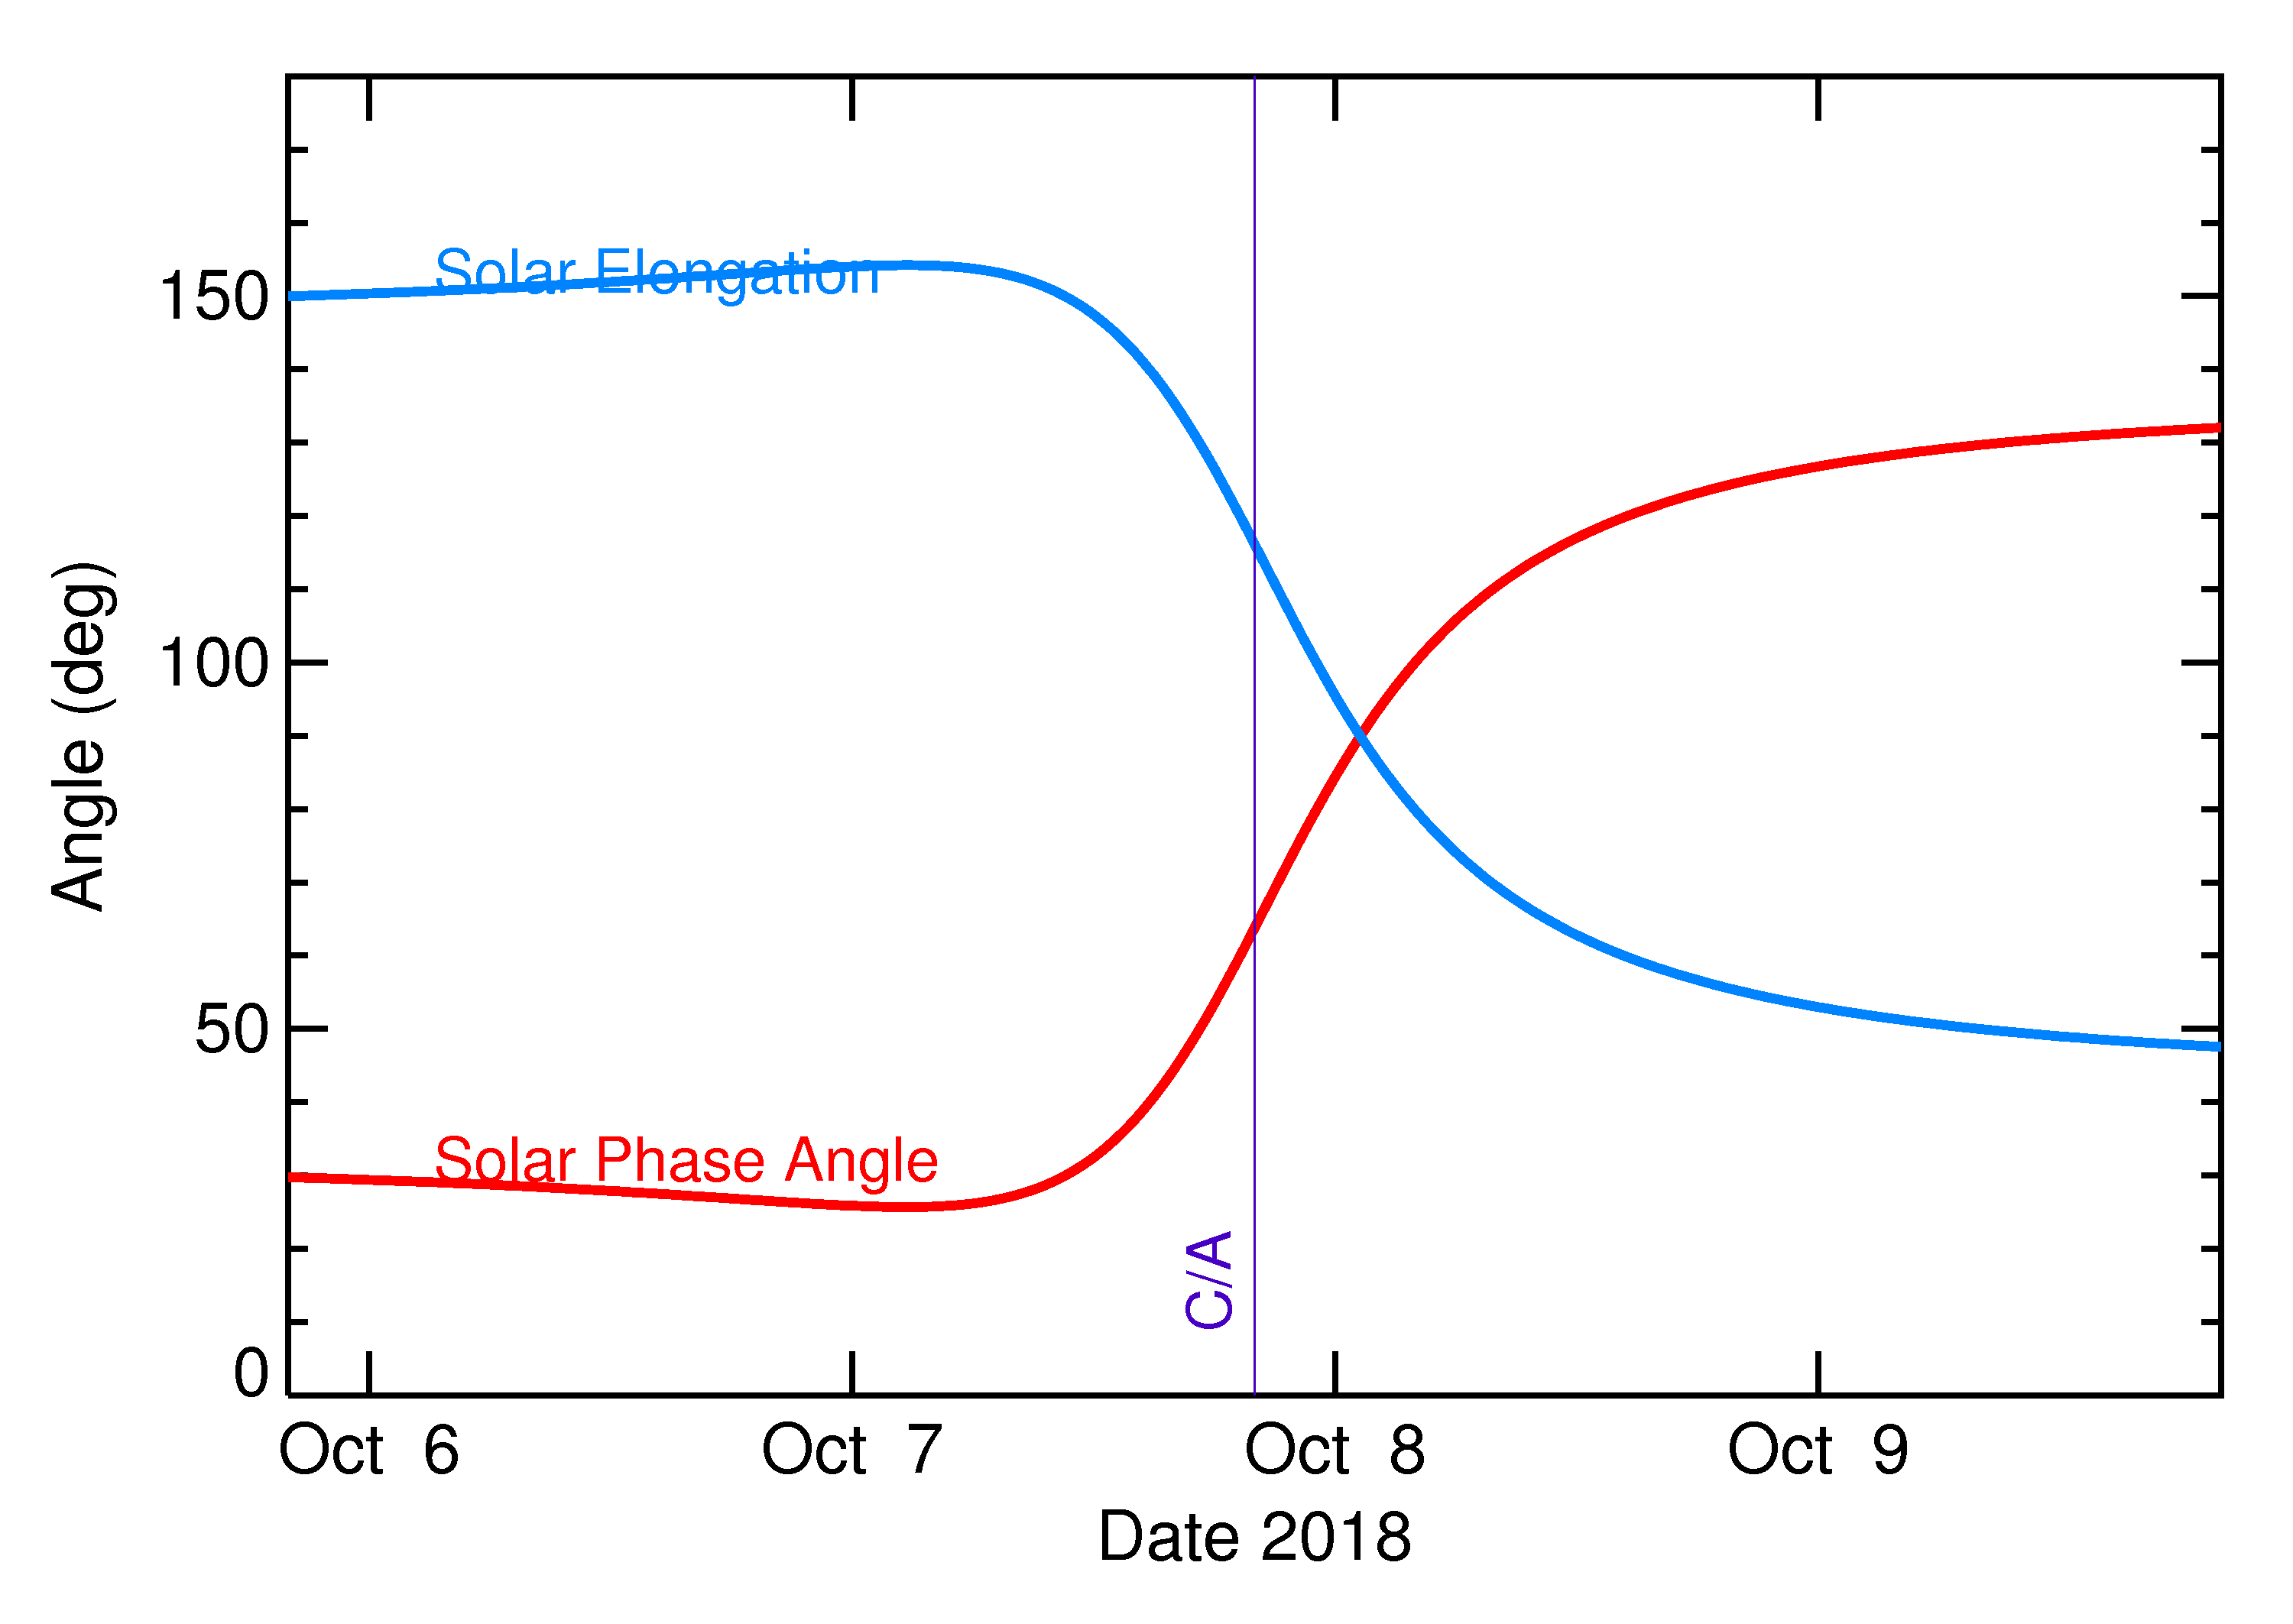 Solar Elongation and Solar Phase Angle of 2018 TV in the days around closest approach